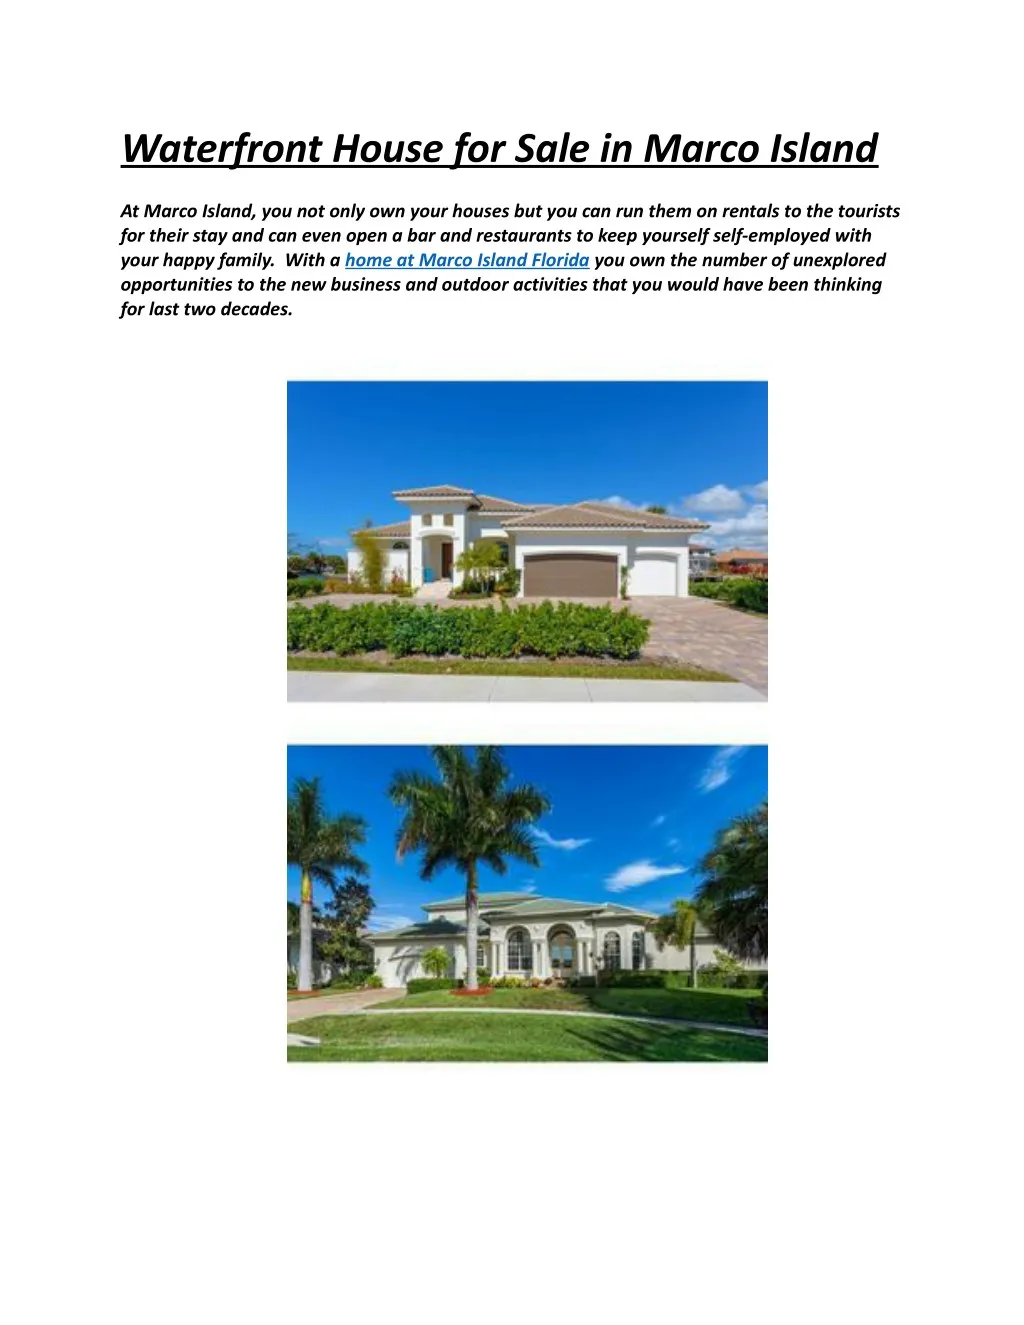 waterfront house for sale in marco island